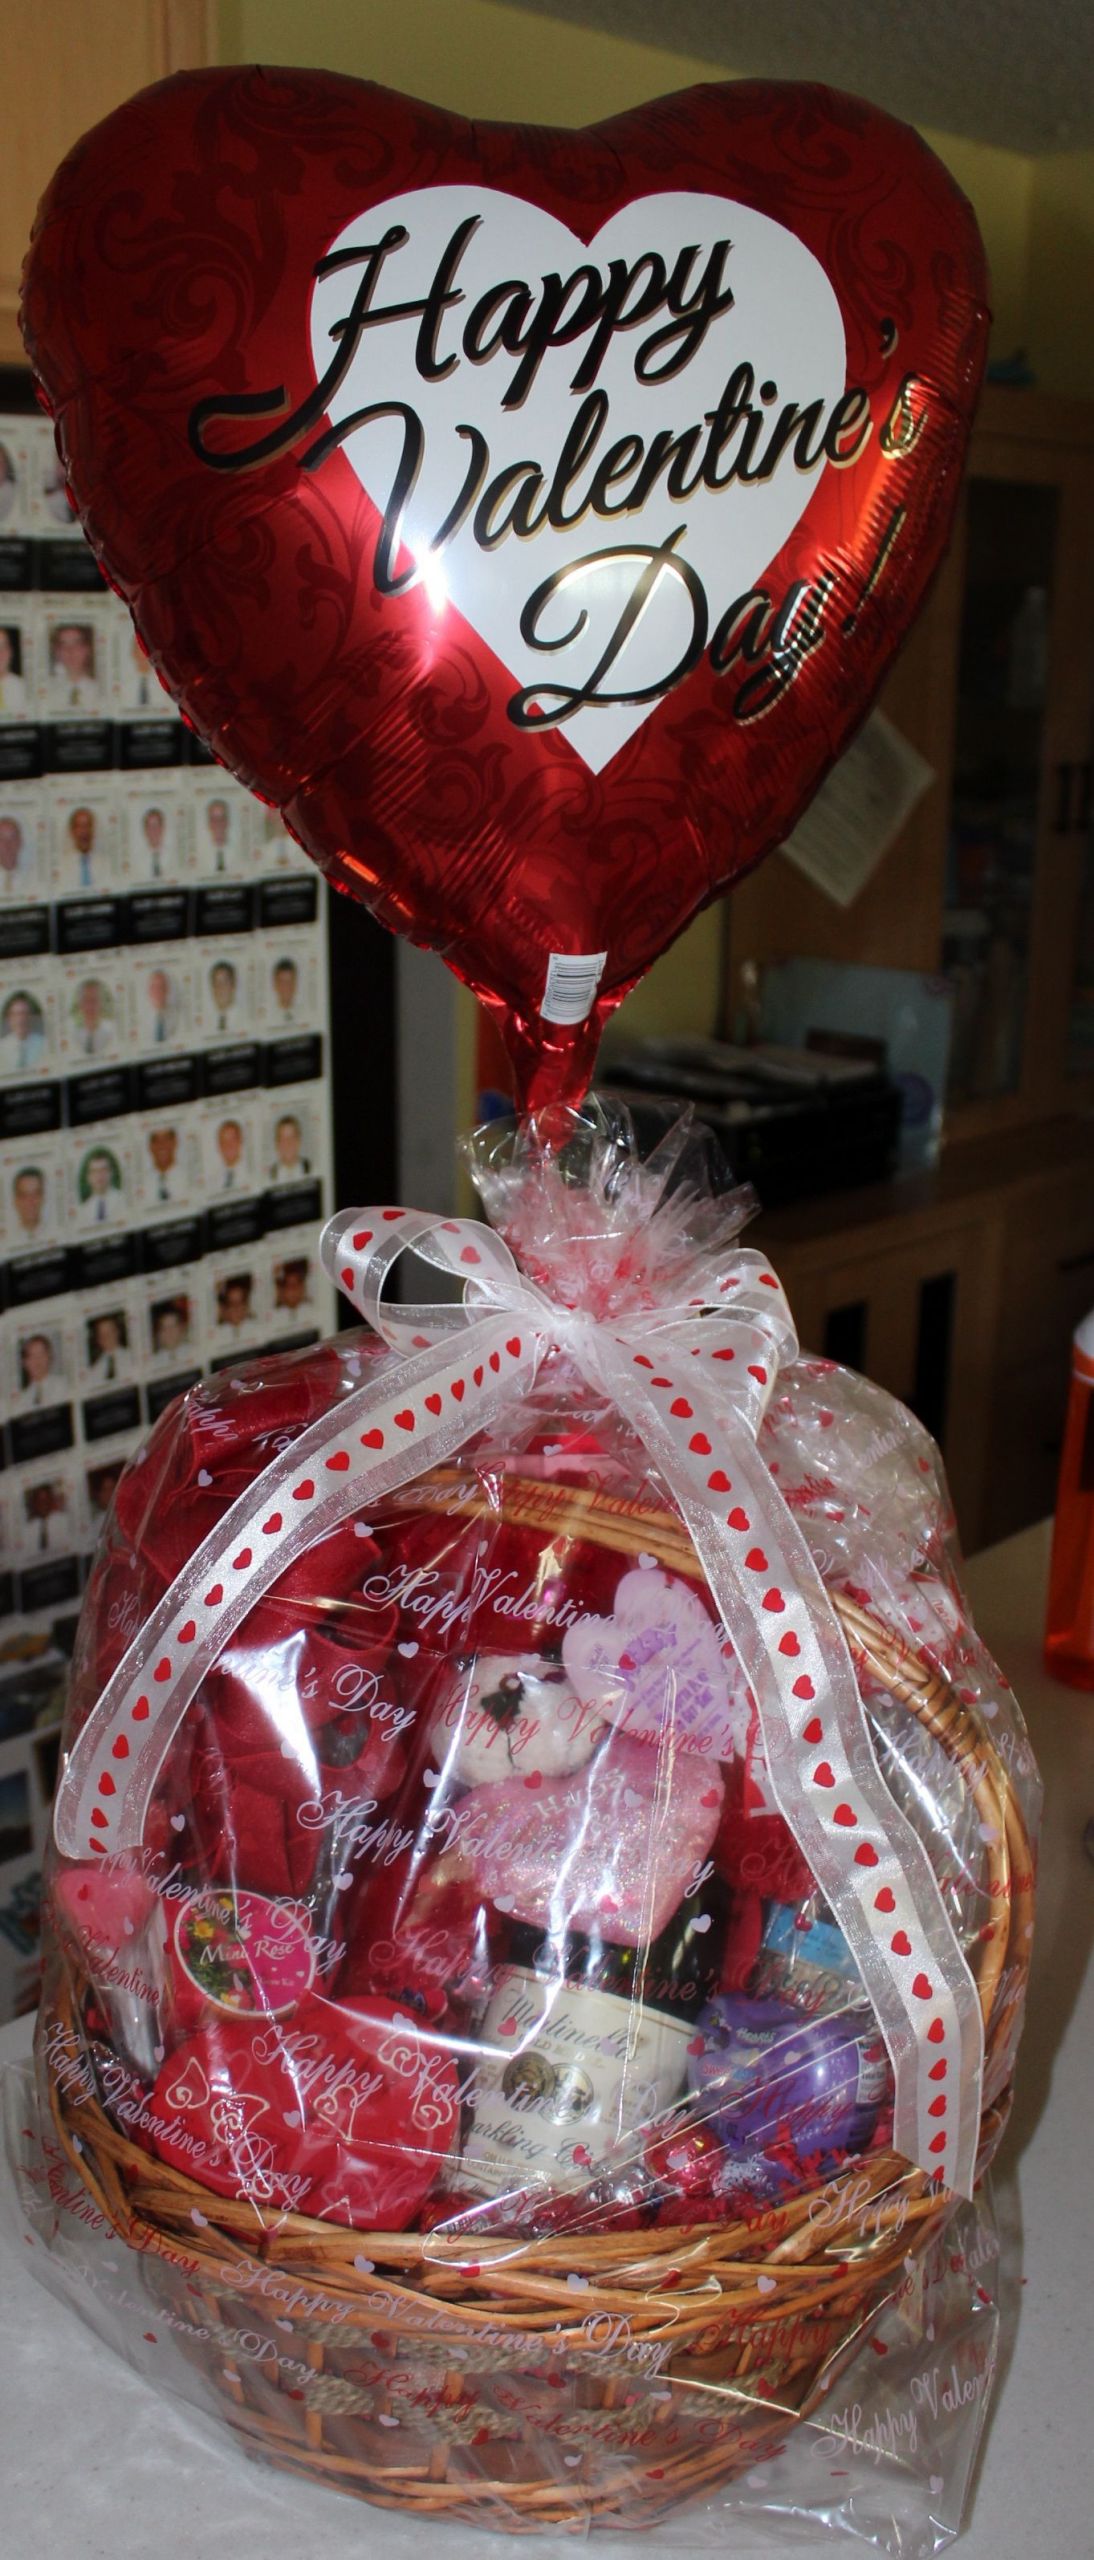 Valentines Gift Ideas For Women
 47 How To Make A Valentine Gift Basket For Her Best Idea